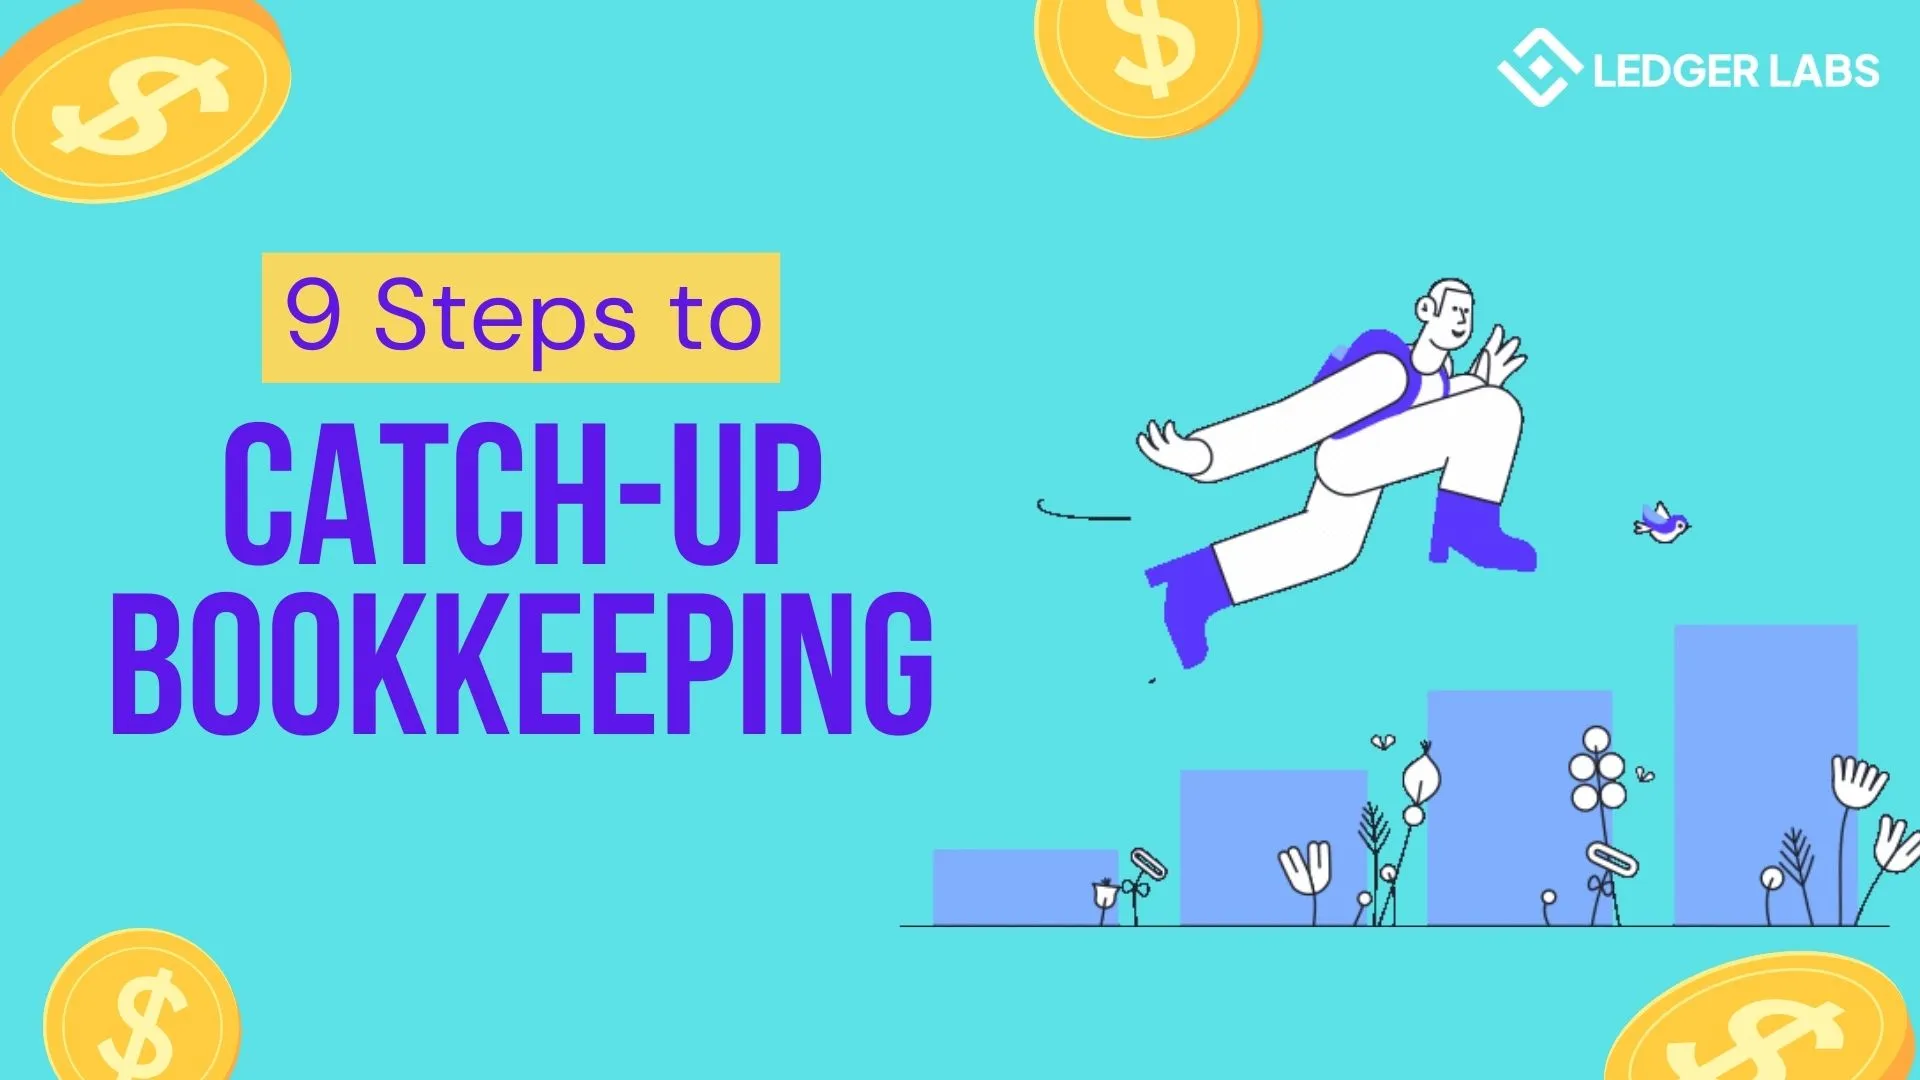 9 Steps to Catch-Up Bookkeeping